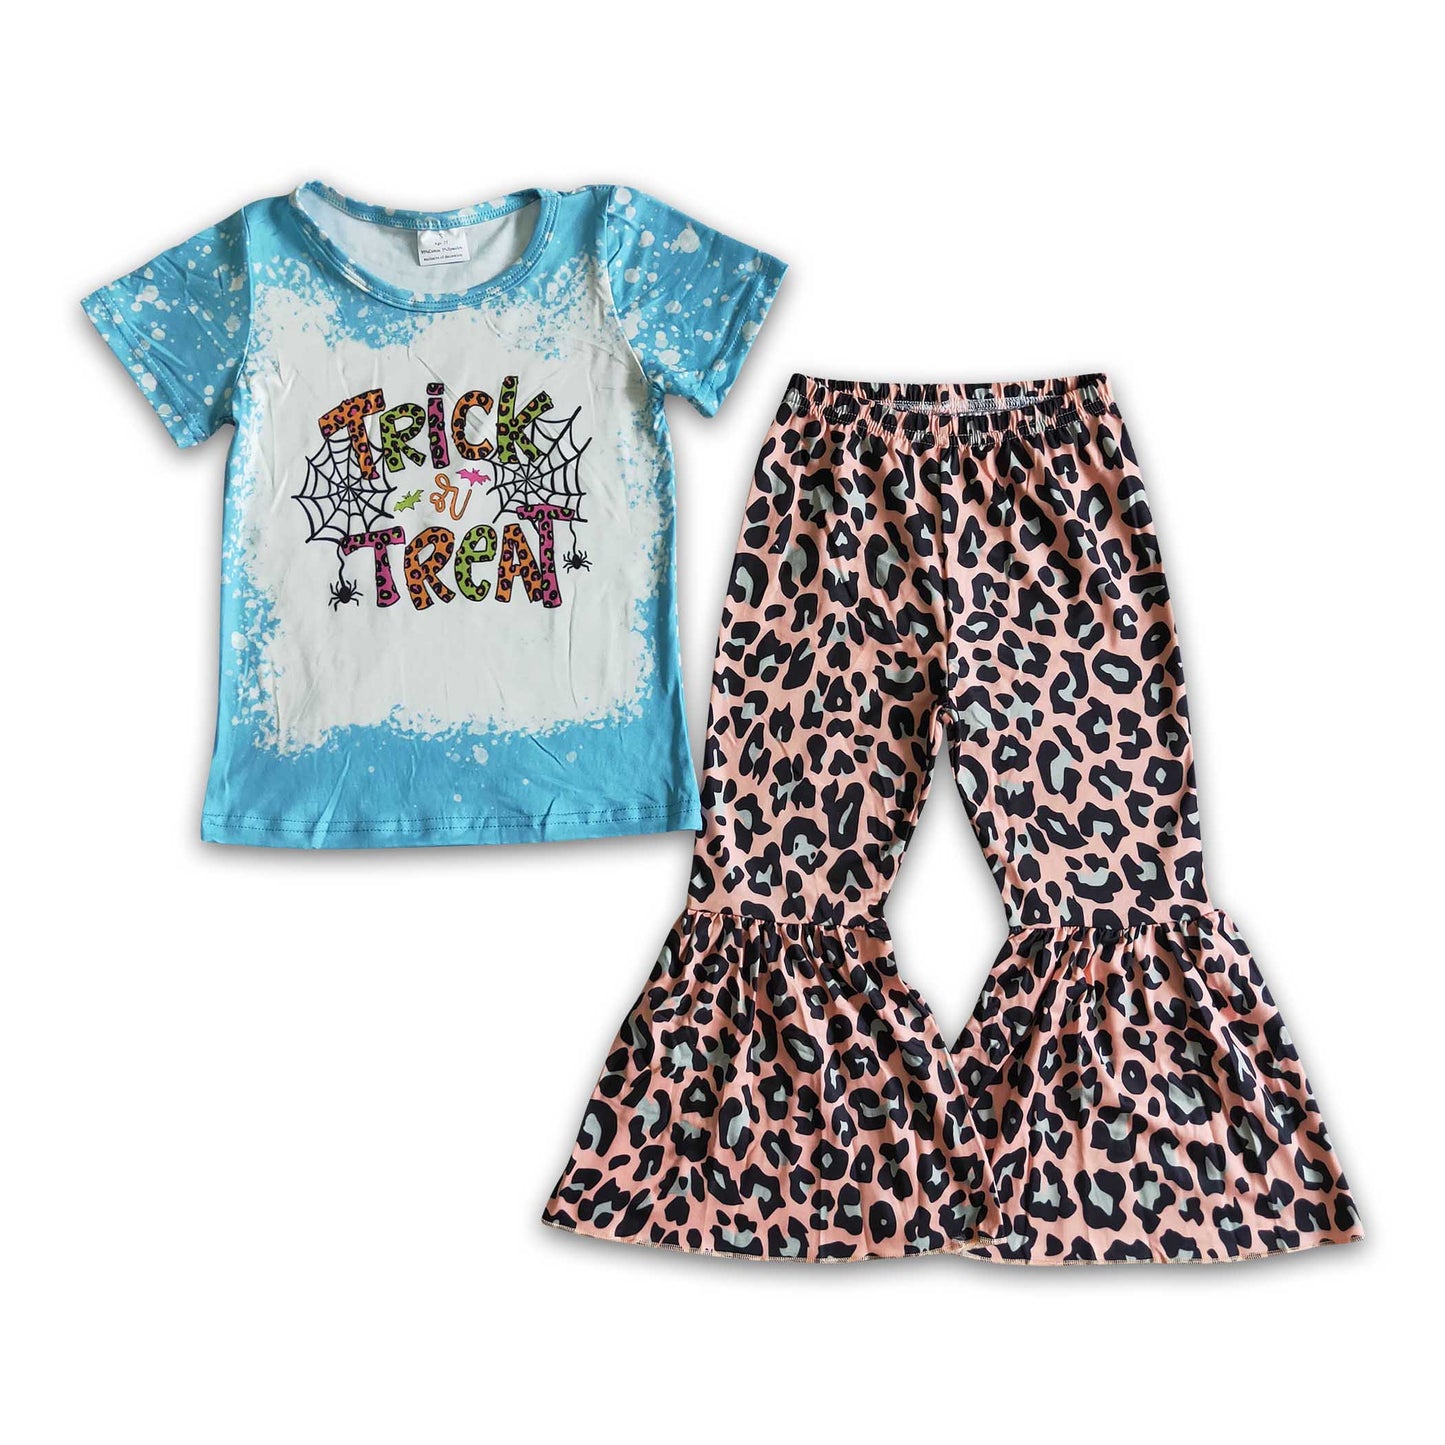 Girl Trick Treat Leopard Outfit